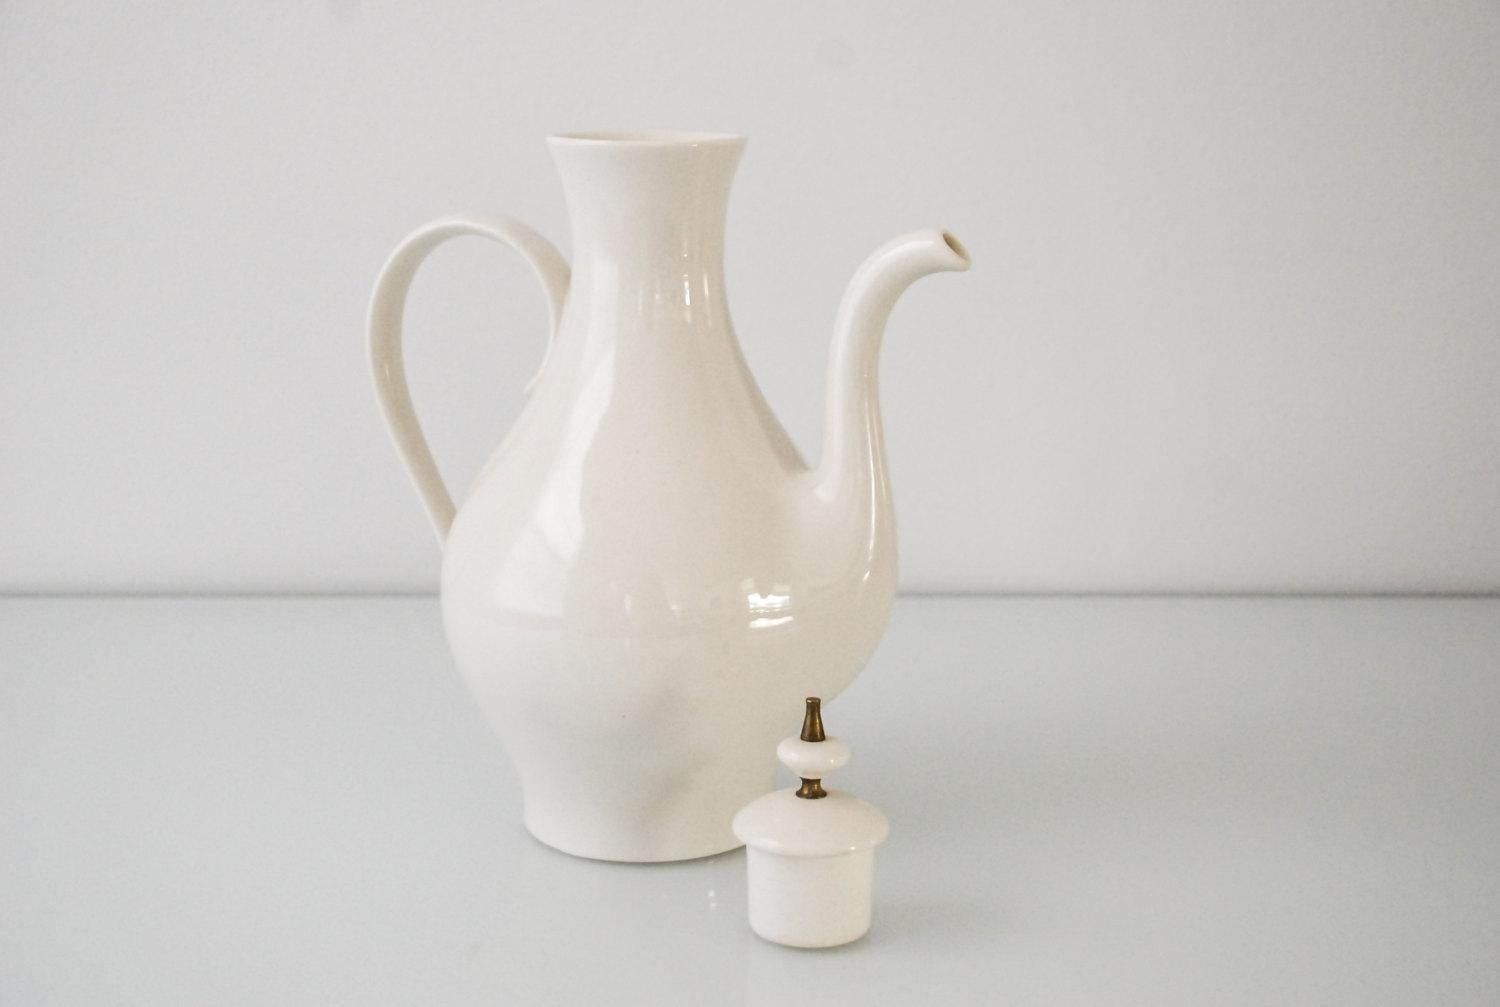 • Mid-Century Modern porcelain coffee pot from the 1960s.
• Minimalist design with sleek, elegant lines and gentle curves.
• Porcelain lid handle with brass detail.

Dimensions
Width (spout to handle): 9